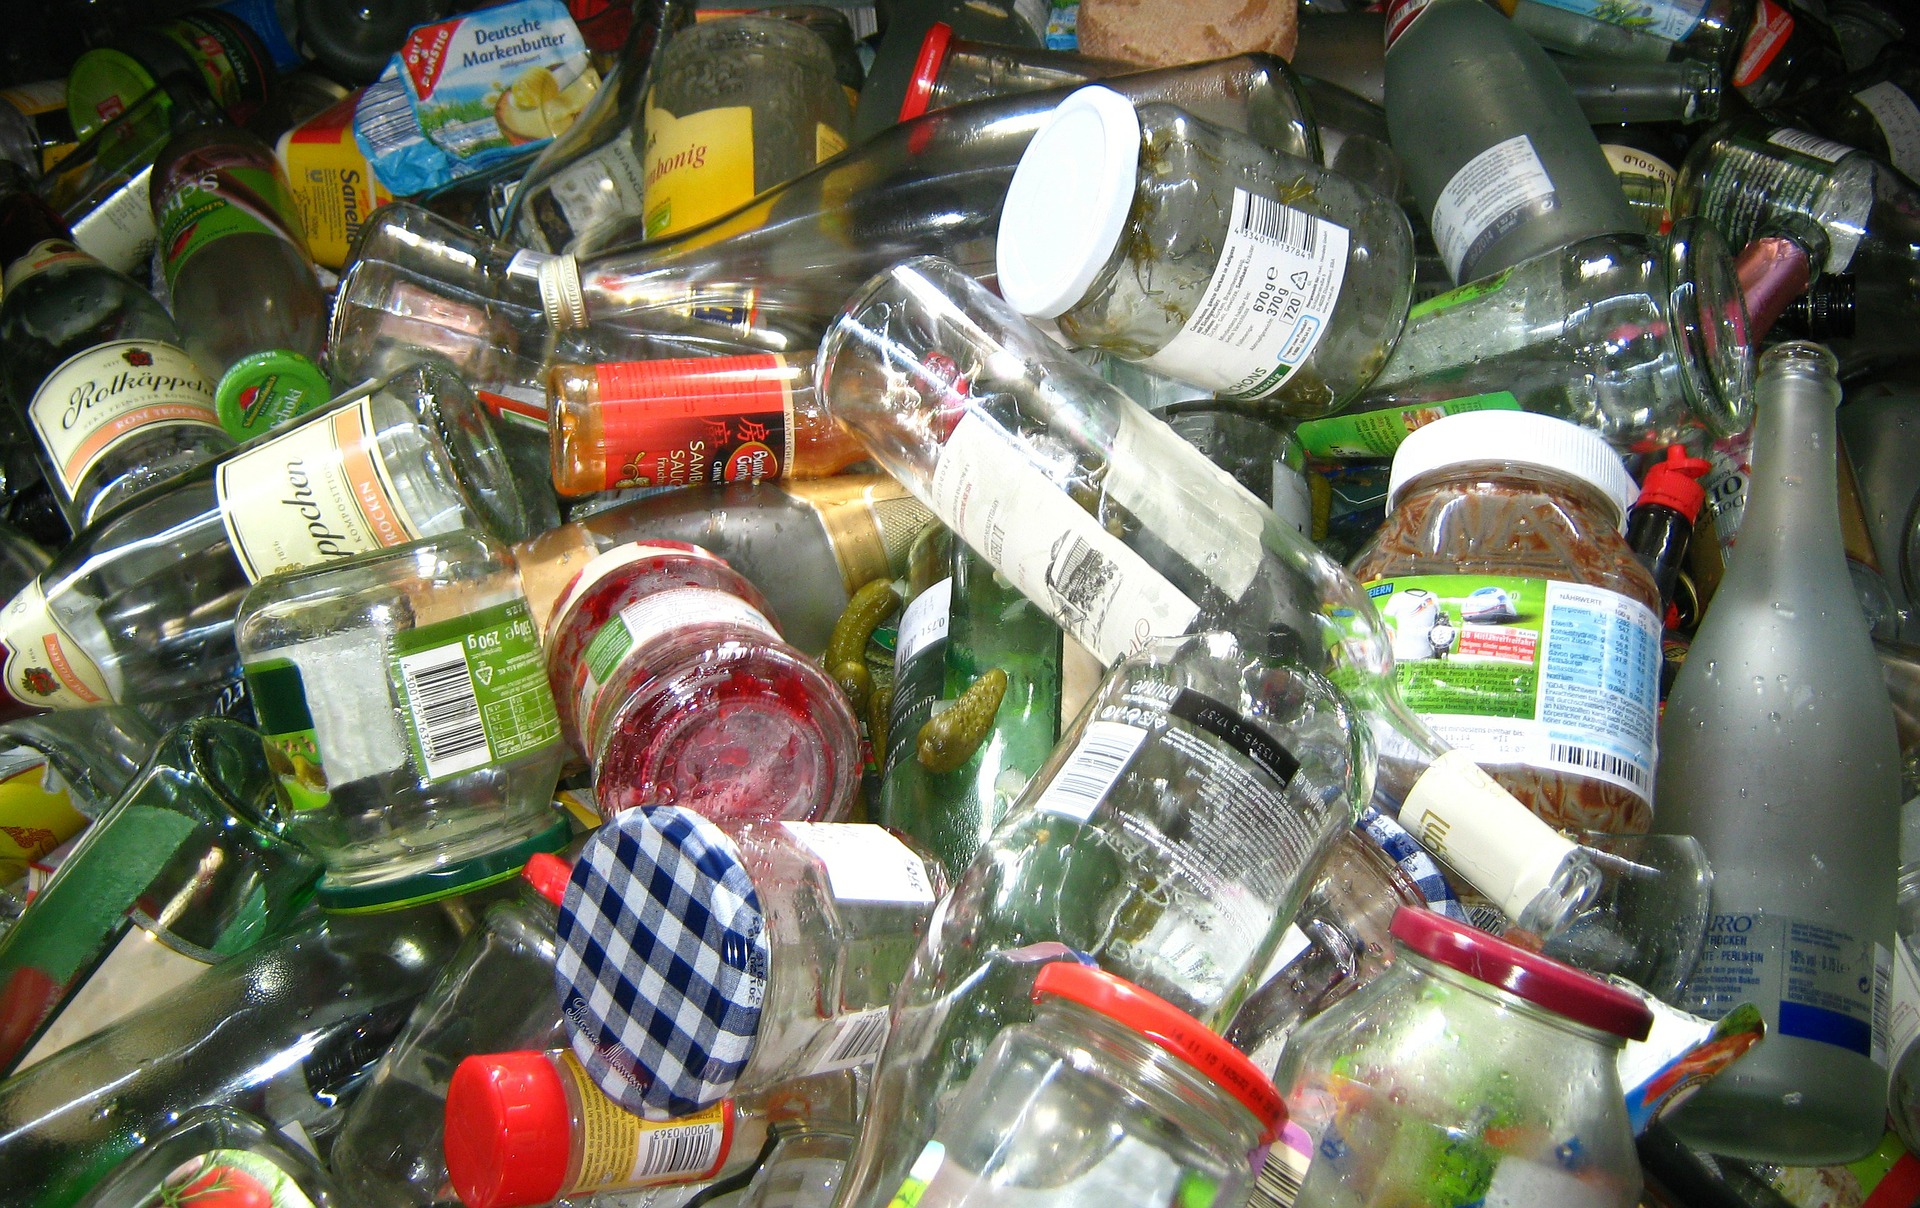 National Audit Office Report finds concerns with UK packaging waste system